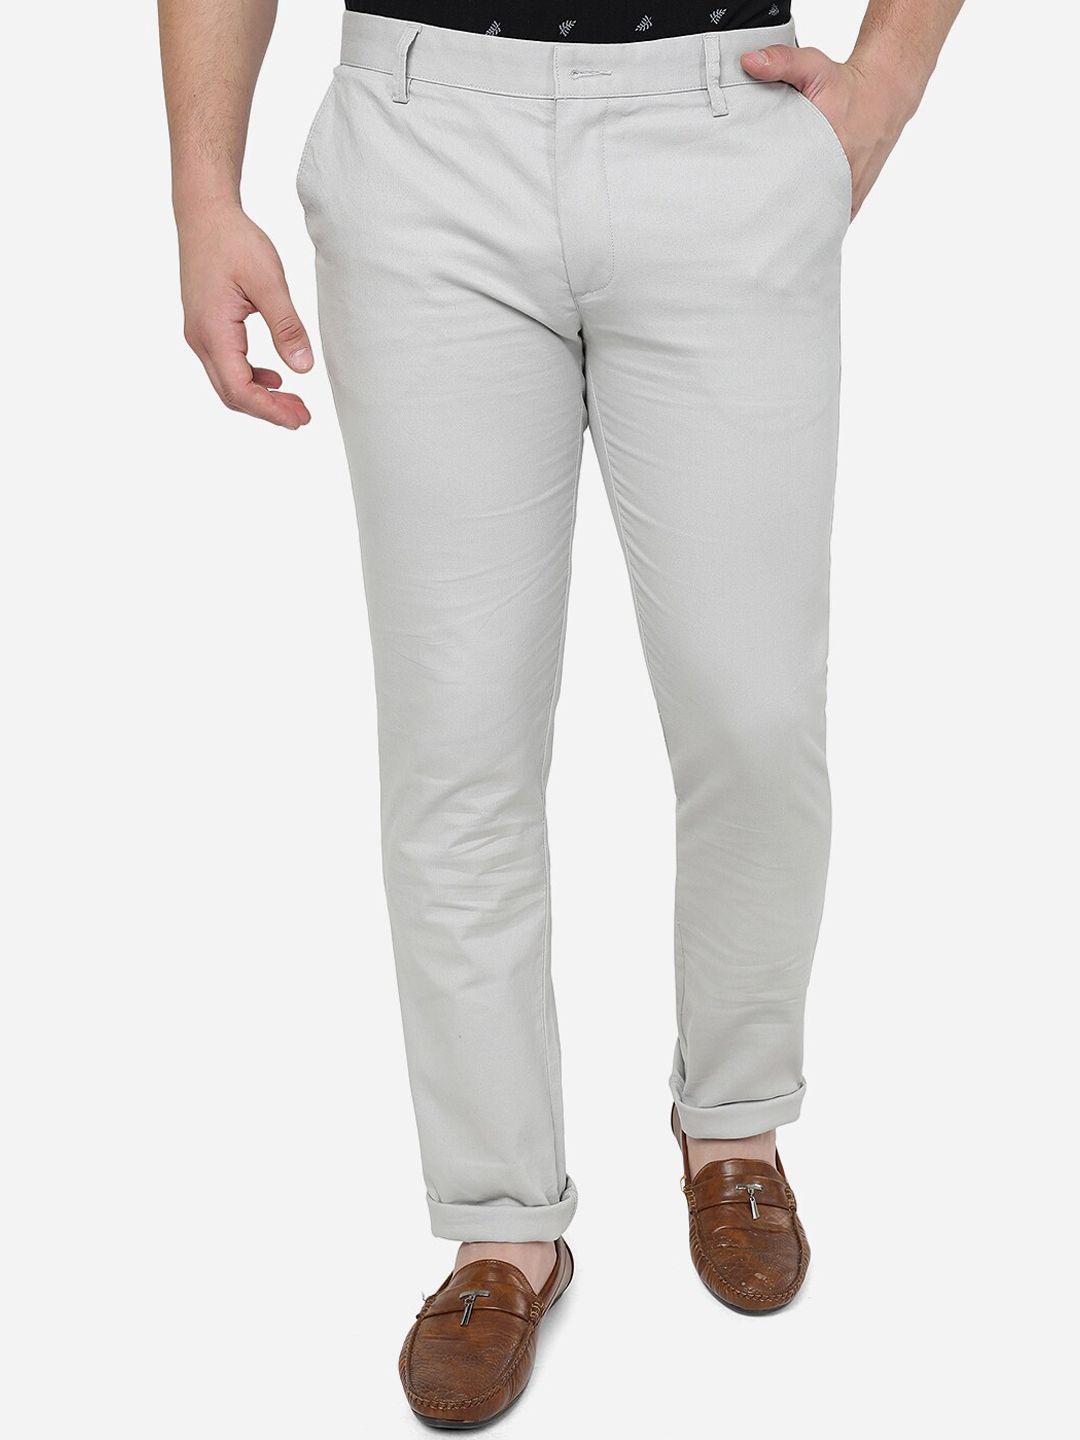 greenfibre-men-super-slim-fit-cotton-mid-rise-chinos-trousers